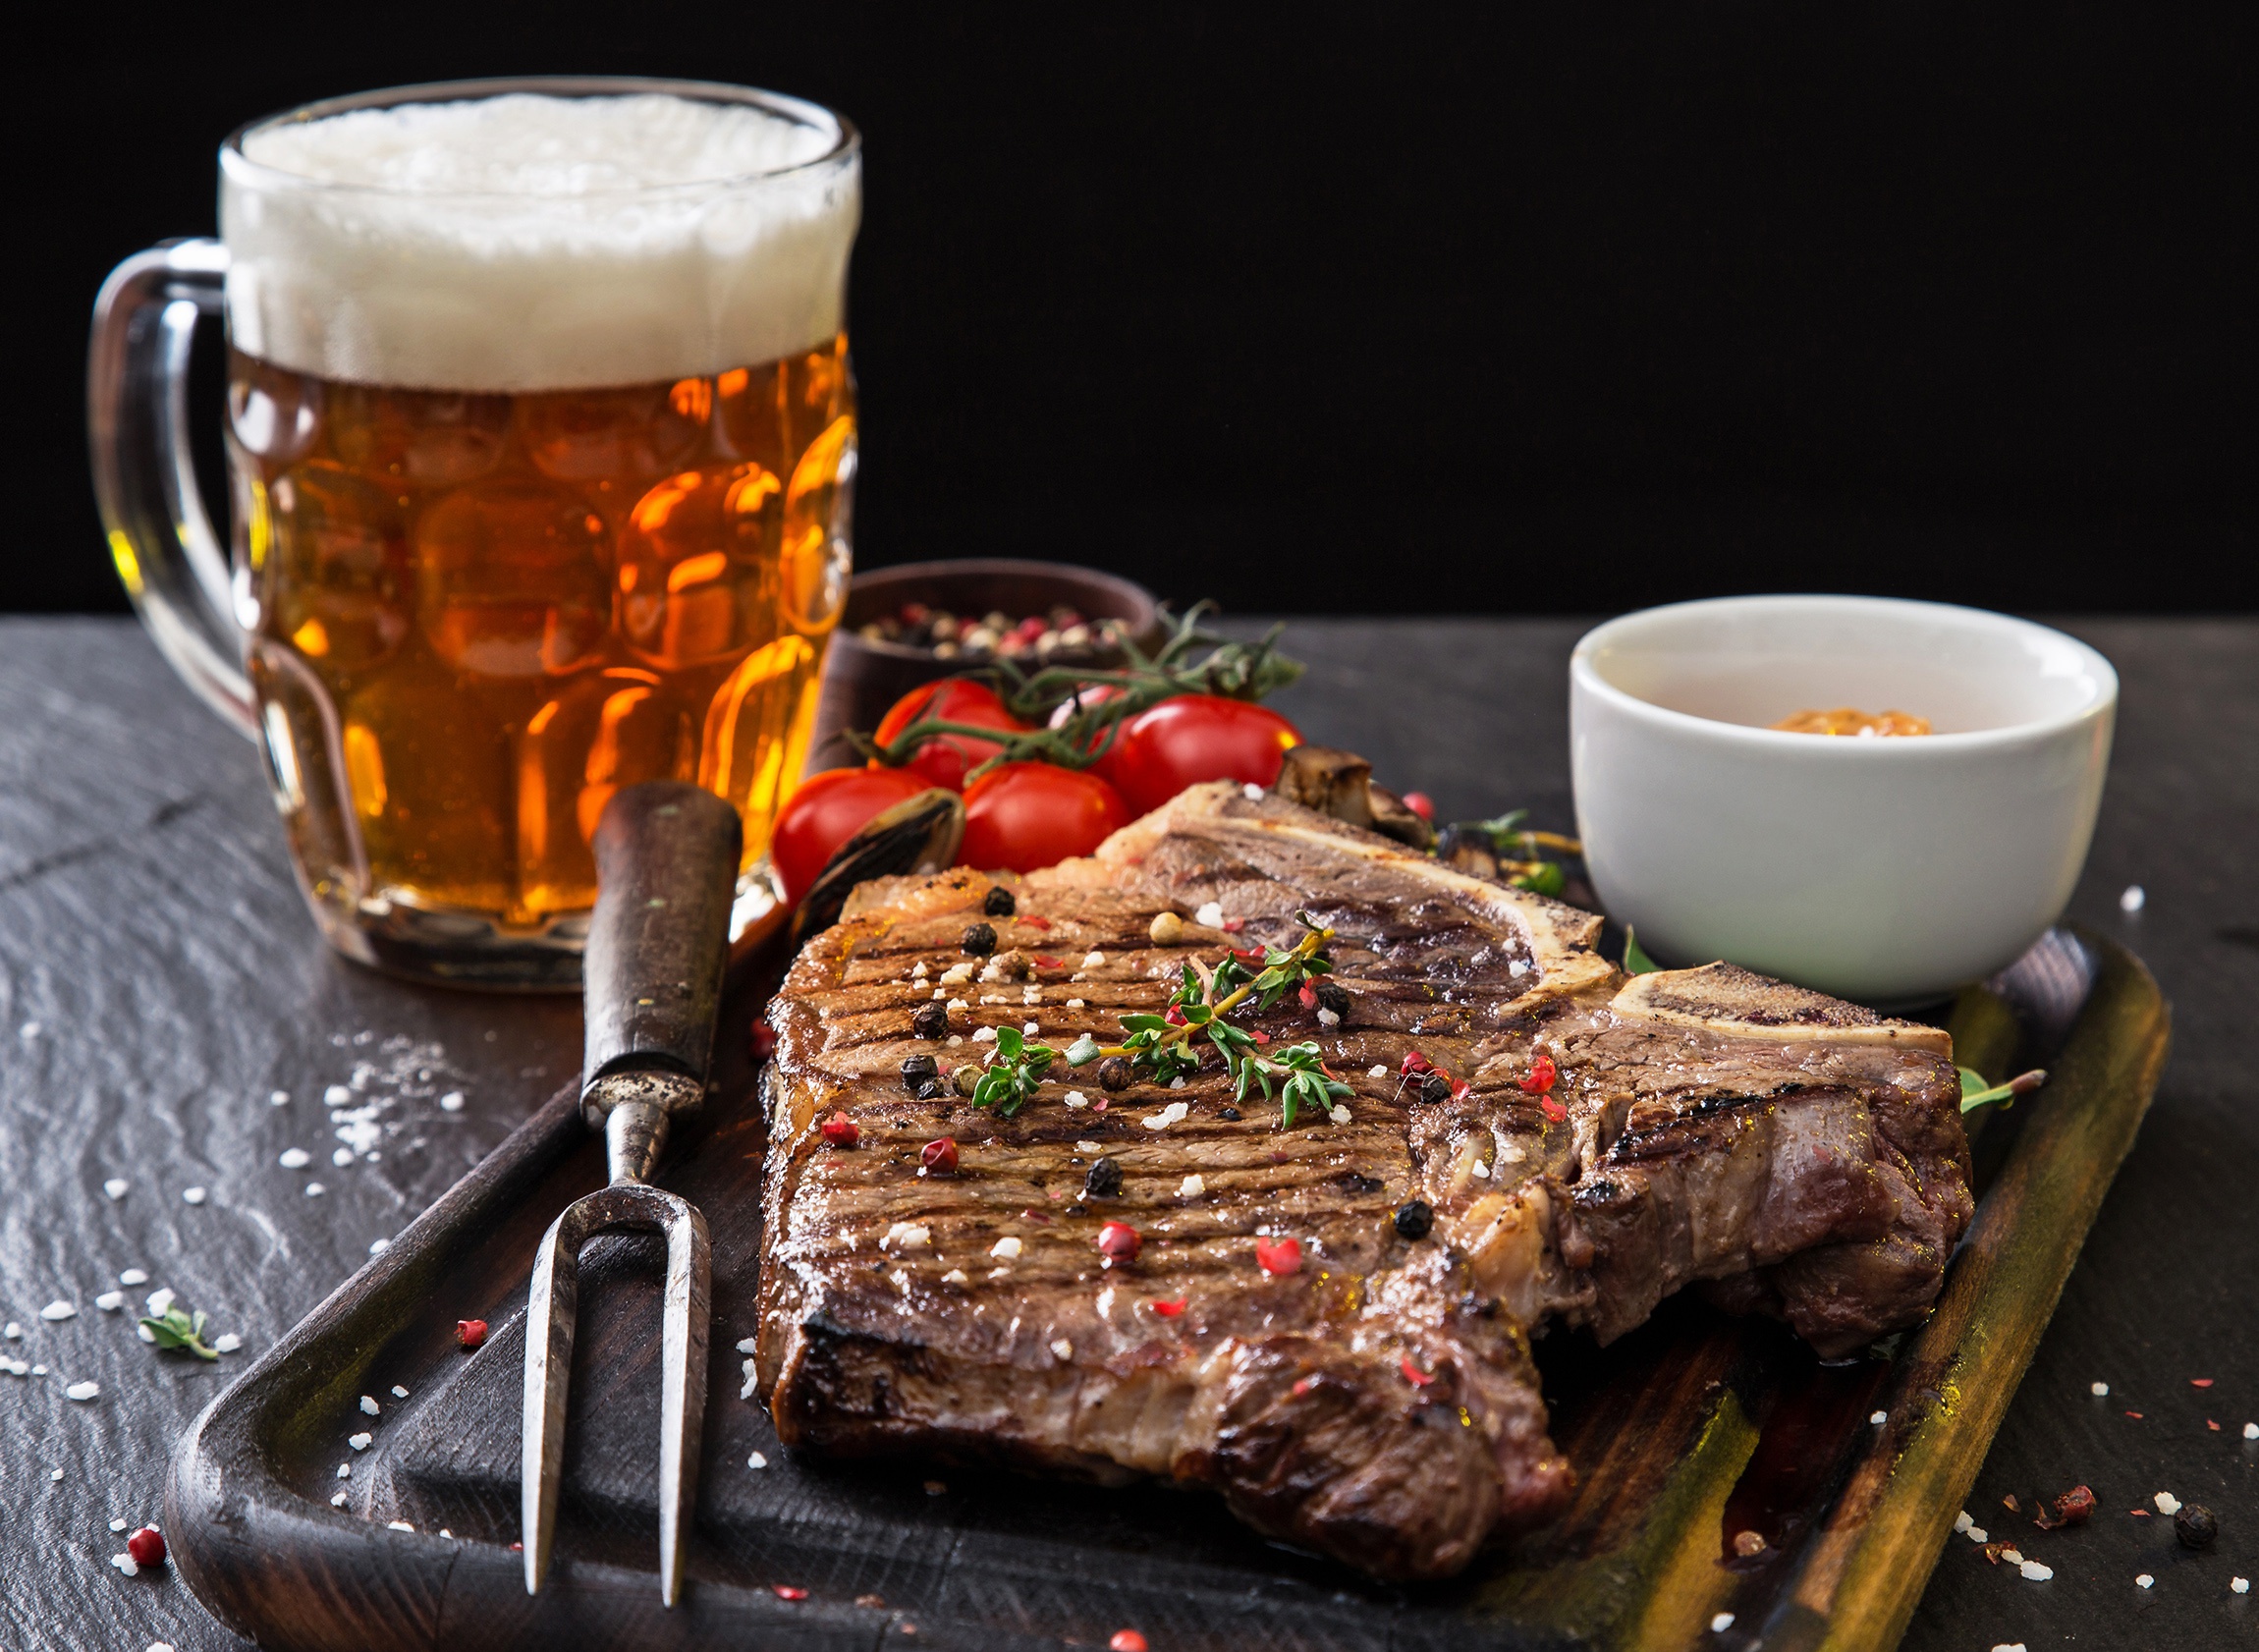 Beer Food Meat Steak Animals Cow Muscles Death Tomatoes Salt Black Pepper Spice Fork Cutting Board 2300x1682